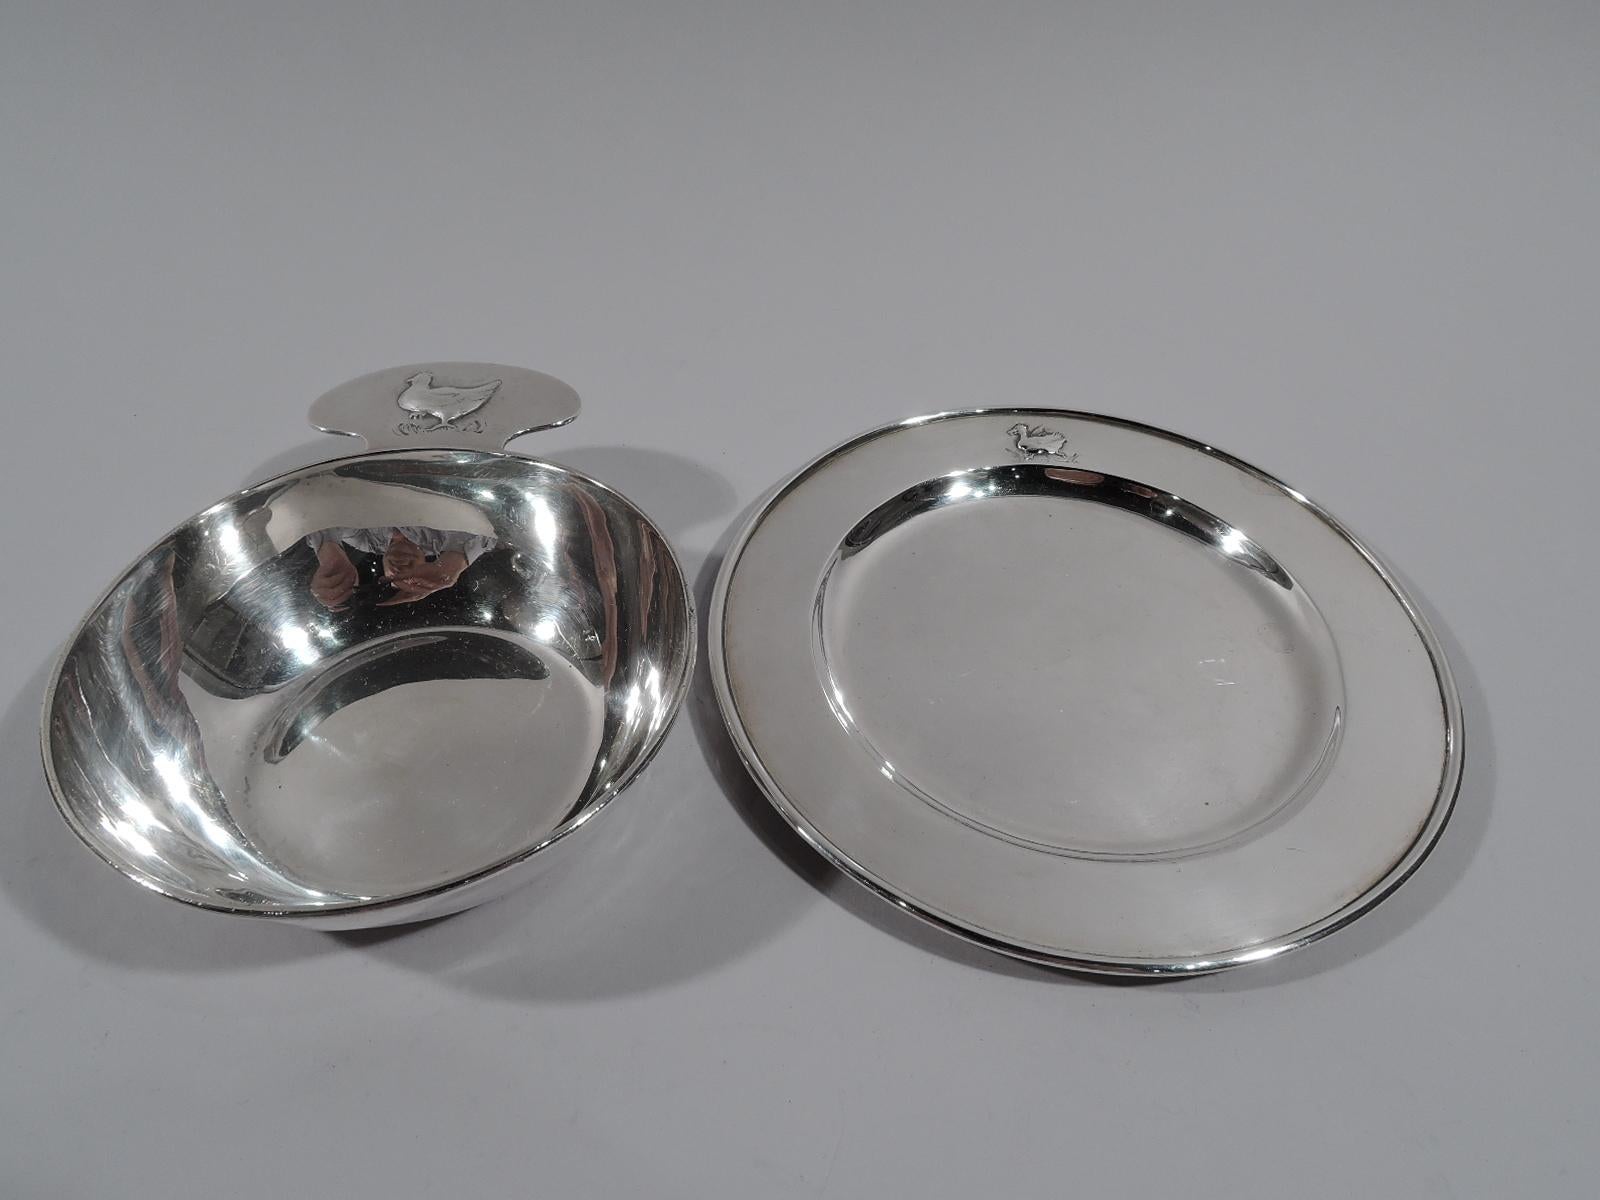 American craftsman sterling silver porringer and plate. Made by Kalo in Chicago. Porringer has round and tapering body with shaped and solid handle. Plate is round with well. Embossed farmyard animals. On porringer handle is a mother hen and on